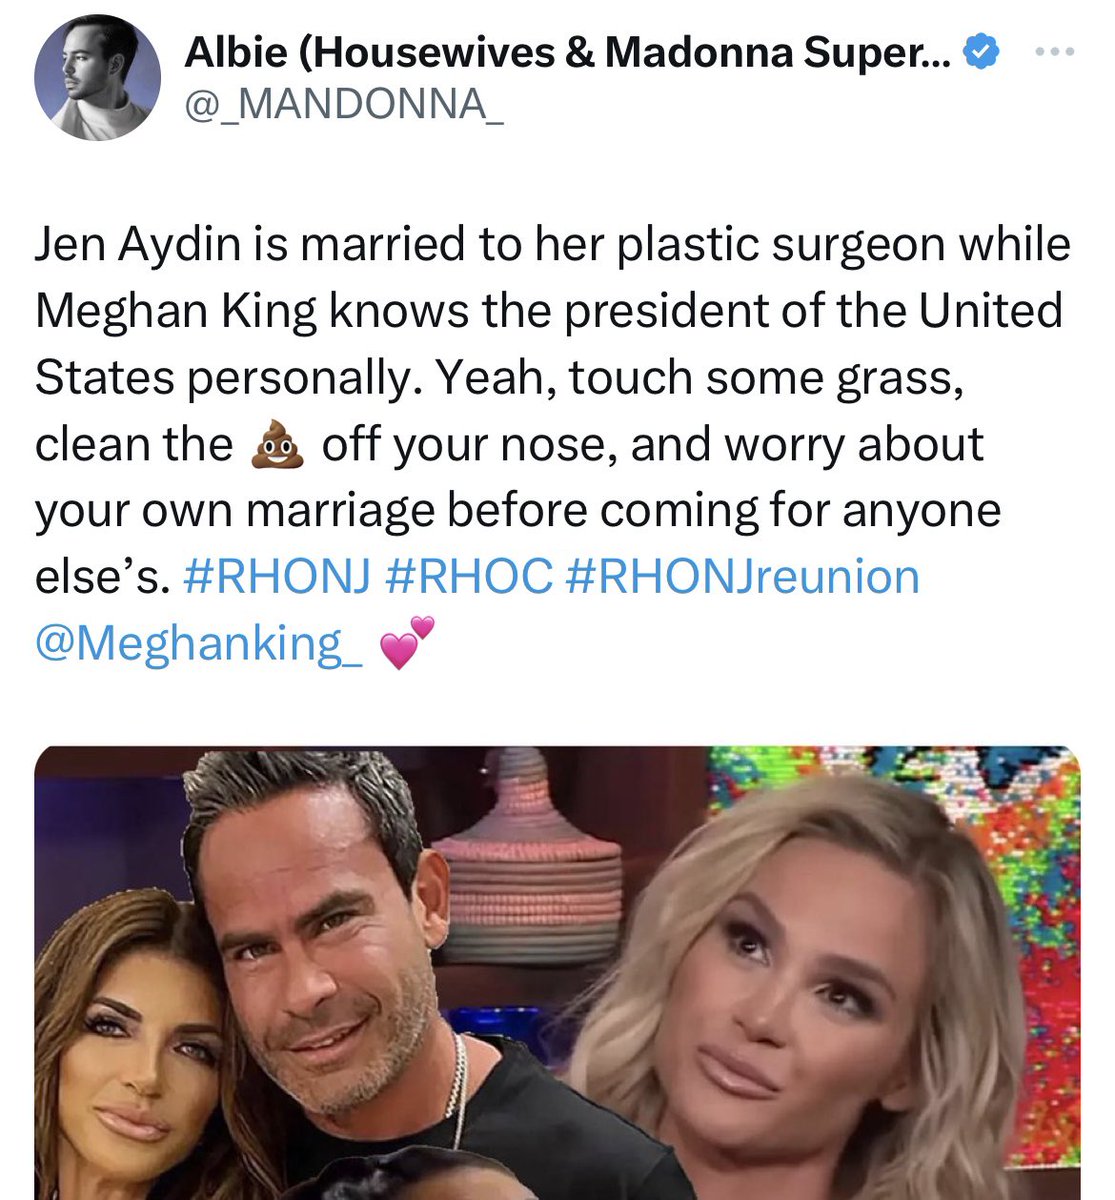 Not flip floppers telling Jen Aydin to worry about her own man because she defended her friend. Shouldn’t giraffe have been worrying about her own man too? Tf? Lmao and still tagging the rhonjreunion 🤭🤣 #rhonj #rhoc